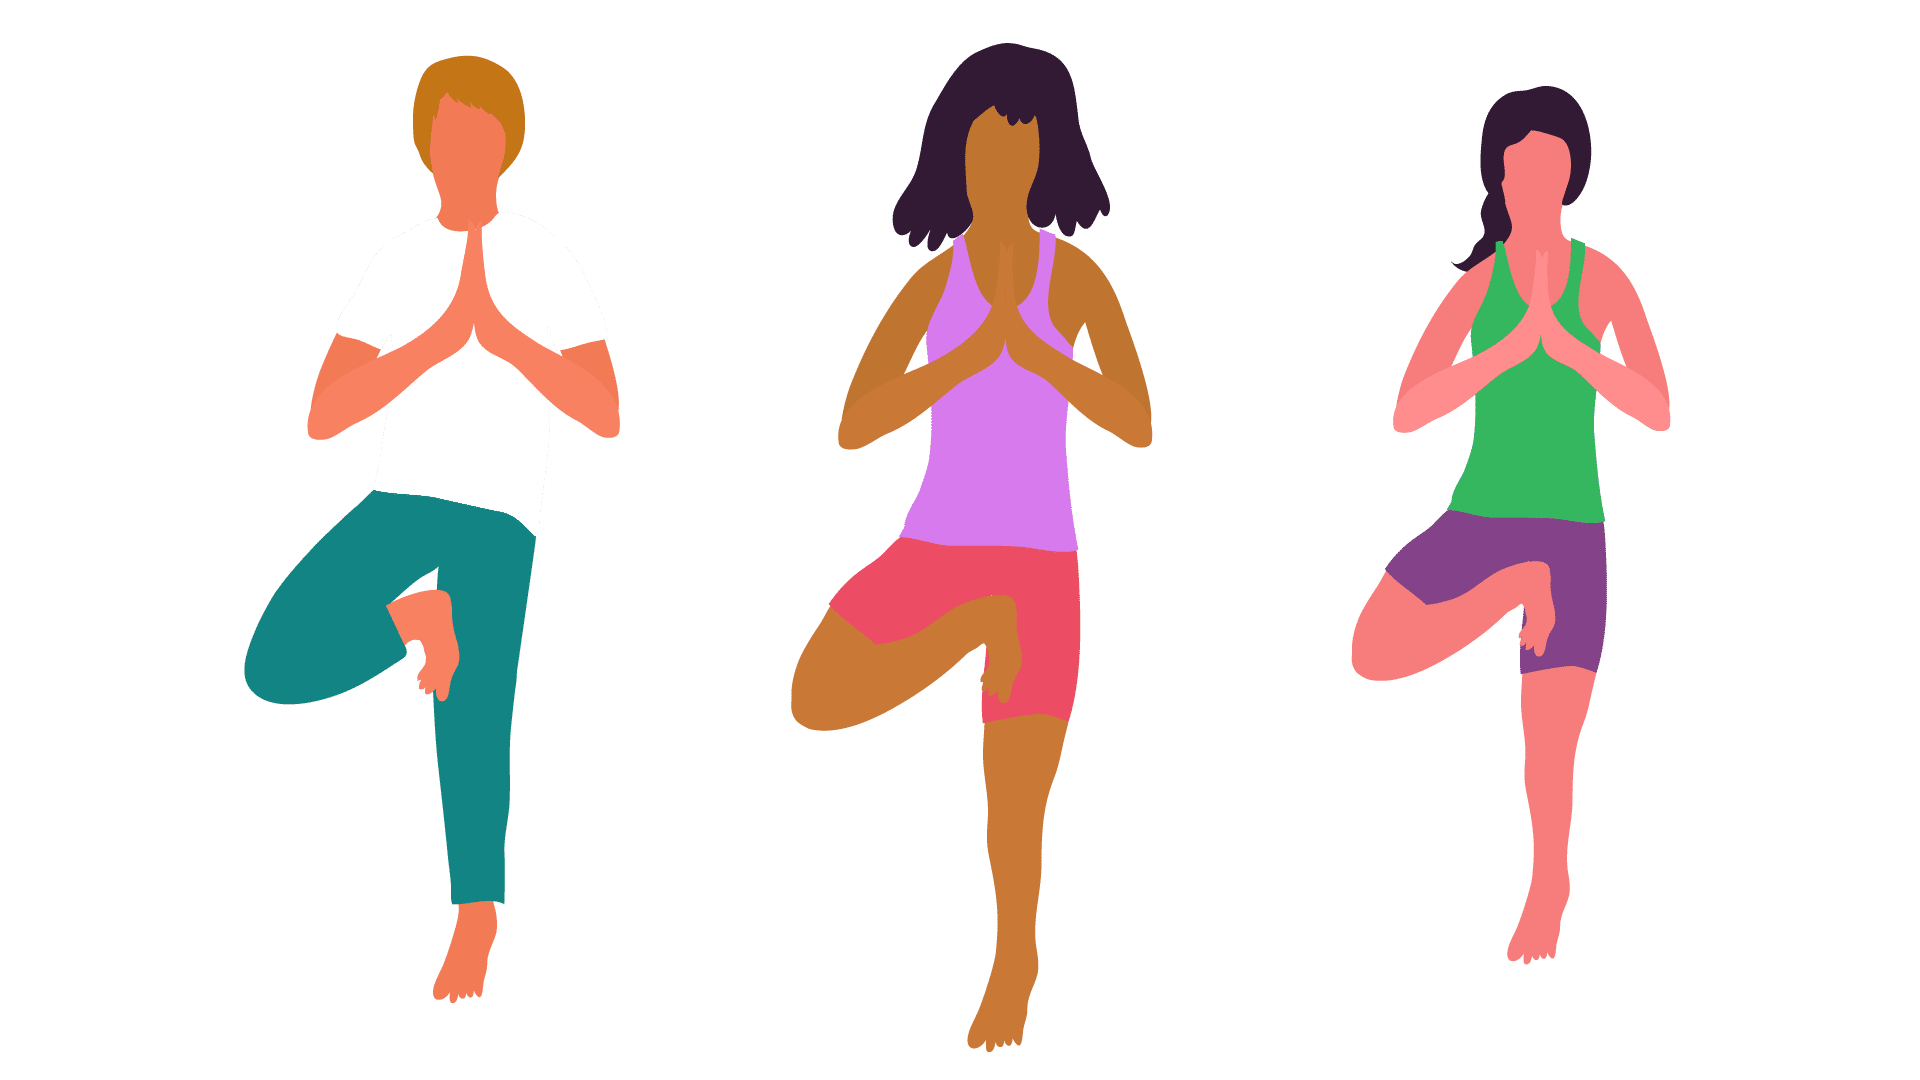 Fitness clipart balance exercise. Yoga poses for your